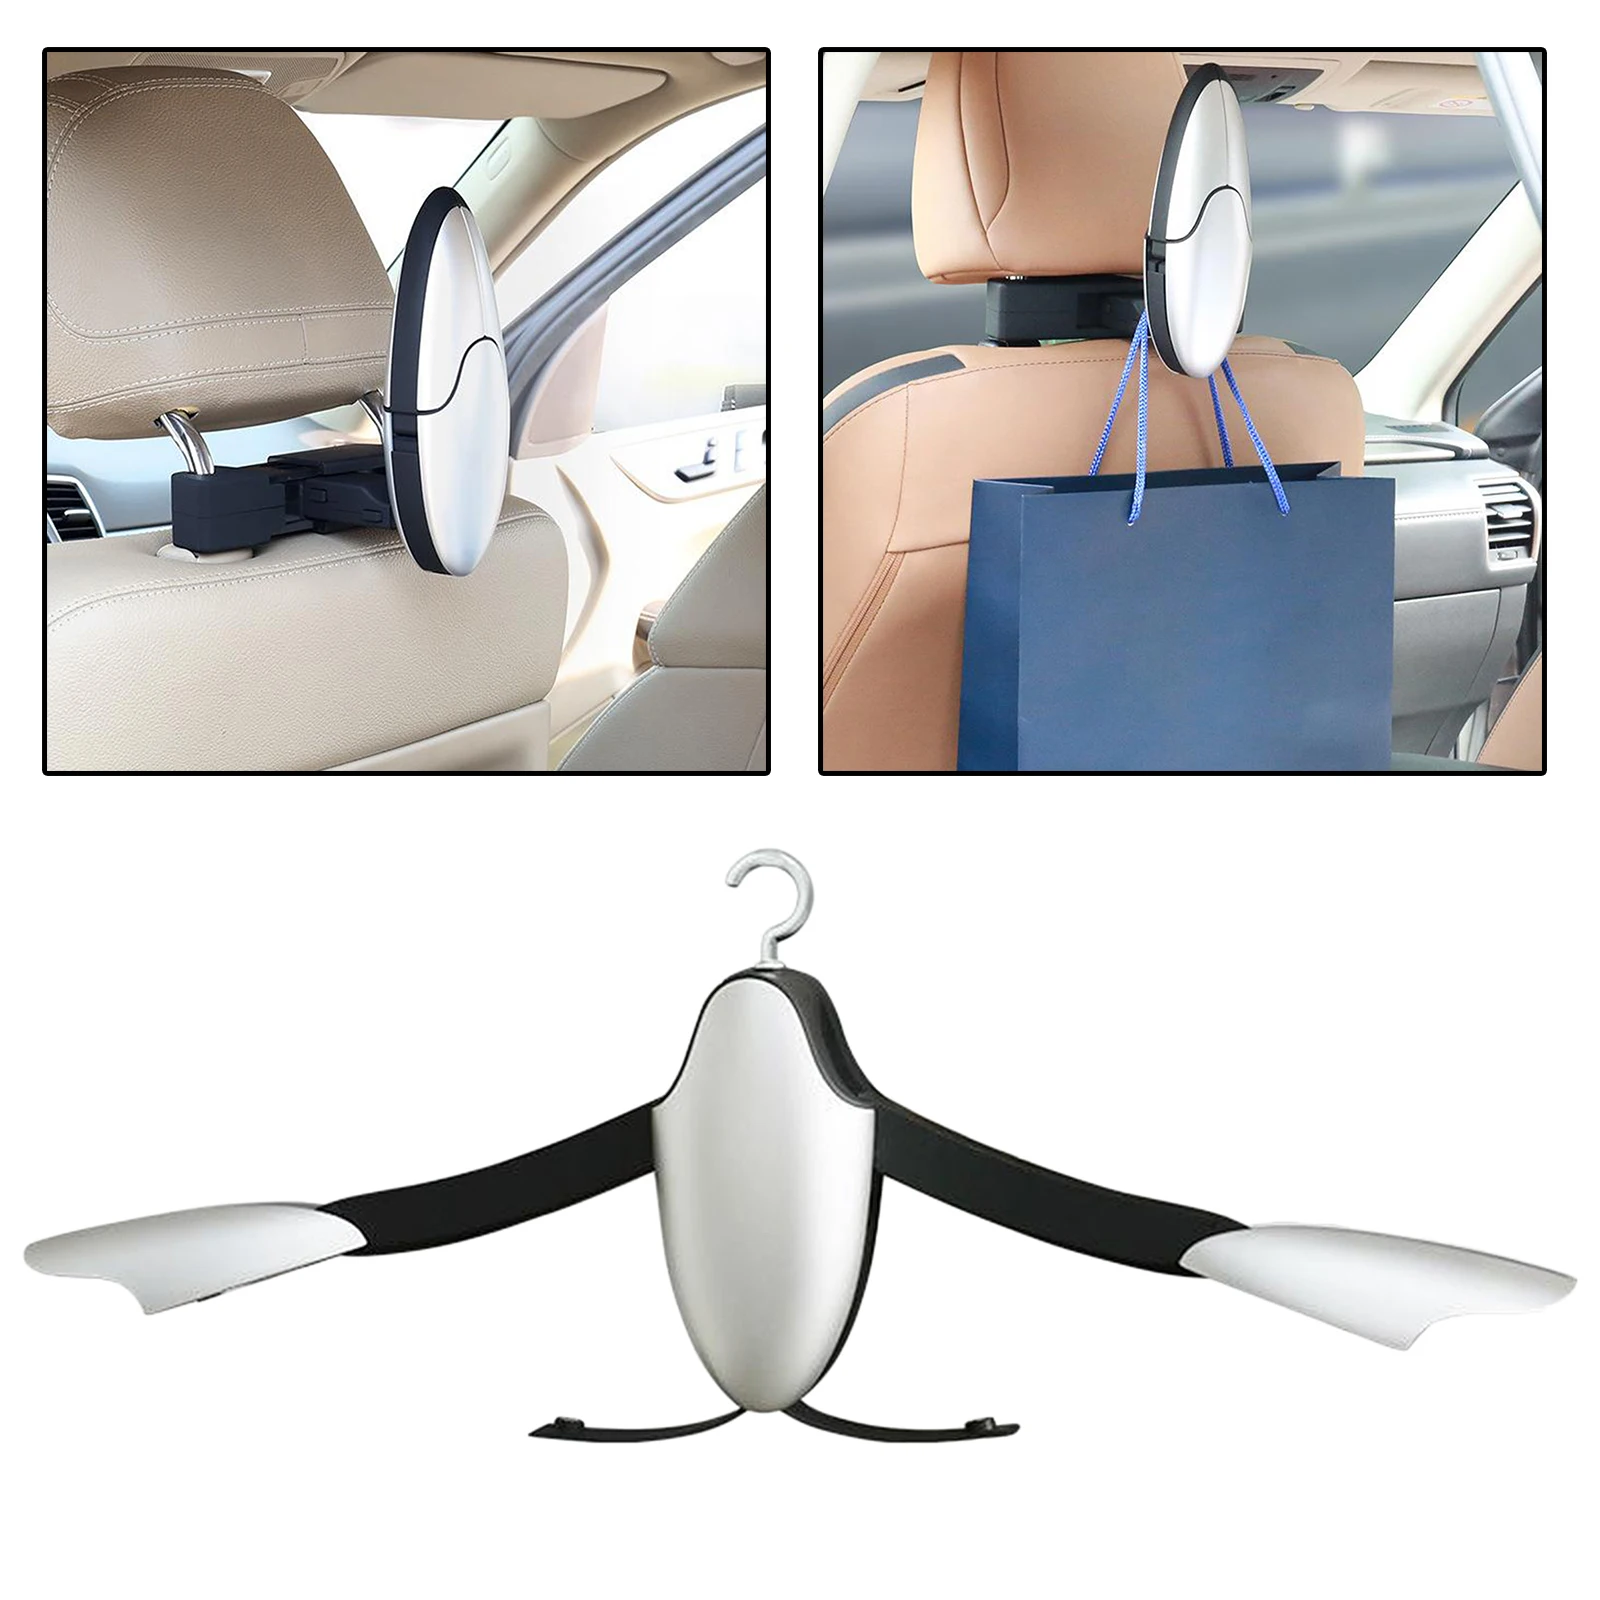 Multi-functional Car Hanger for All Kinds of Clothes Suits Handbags Purses